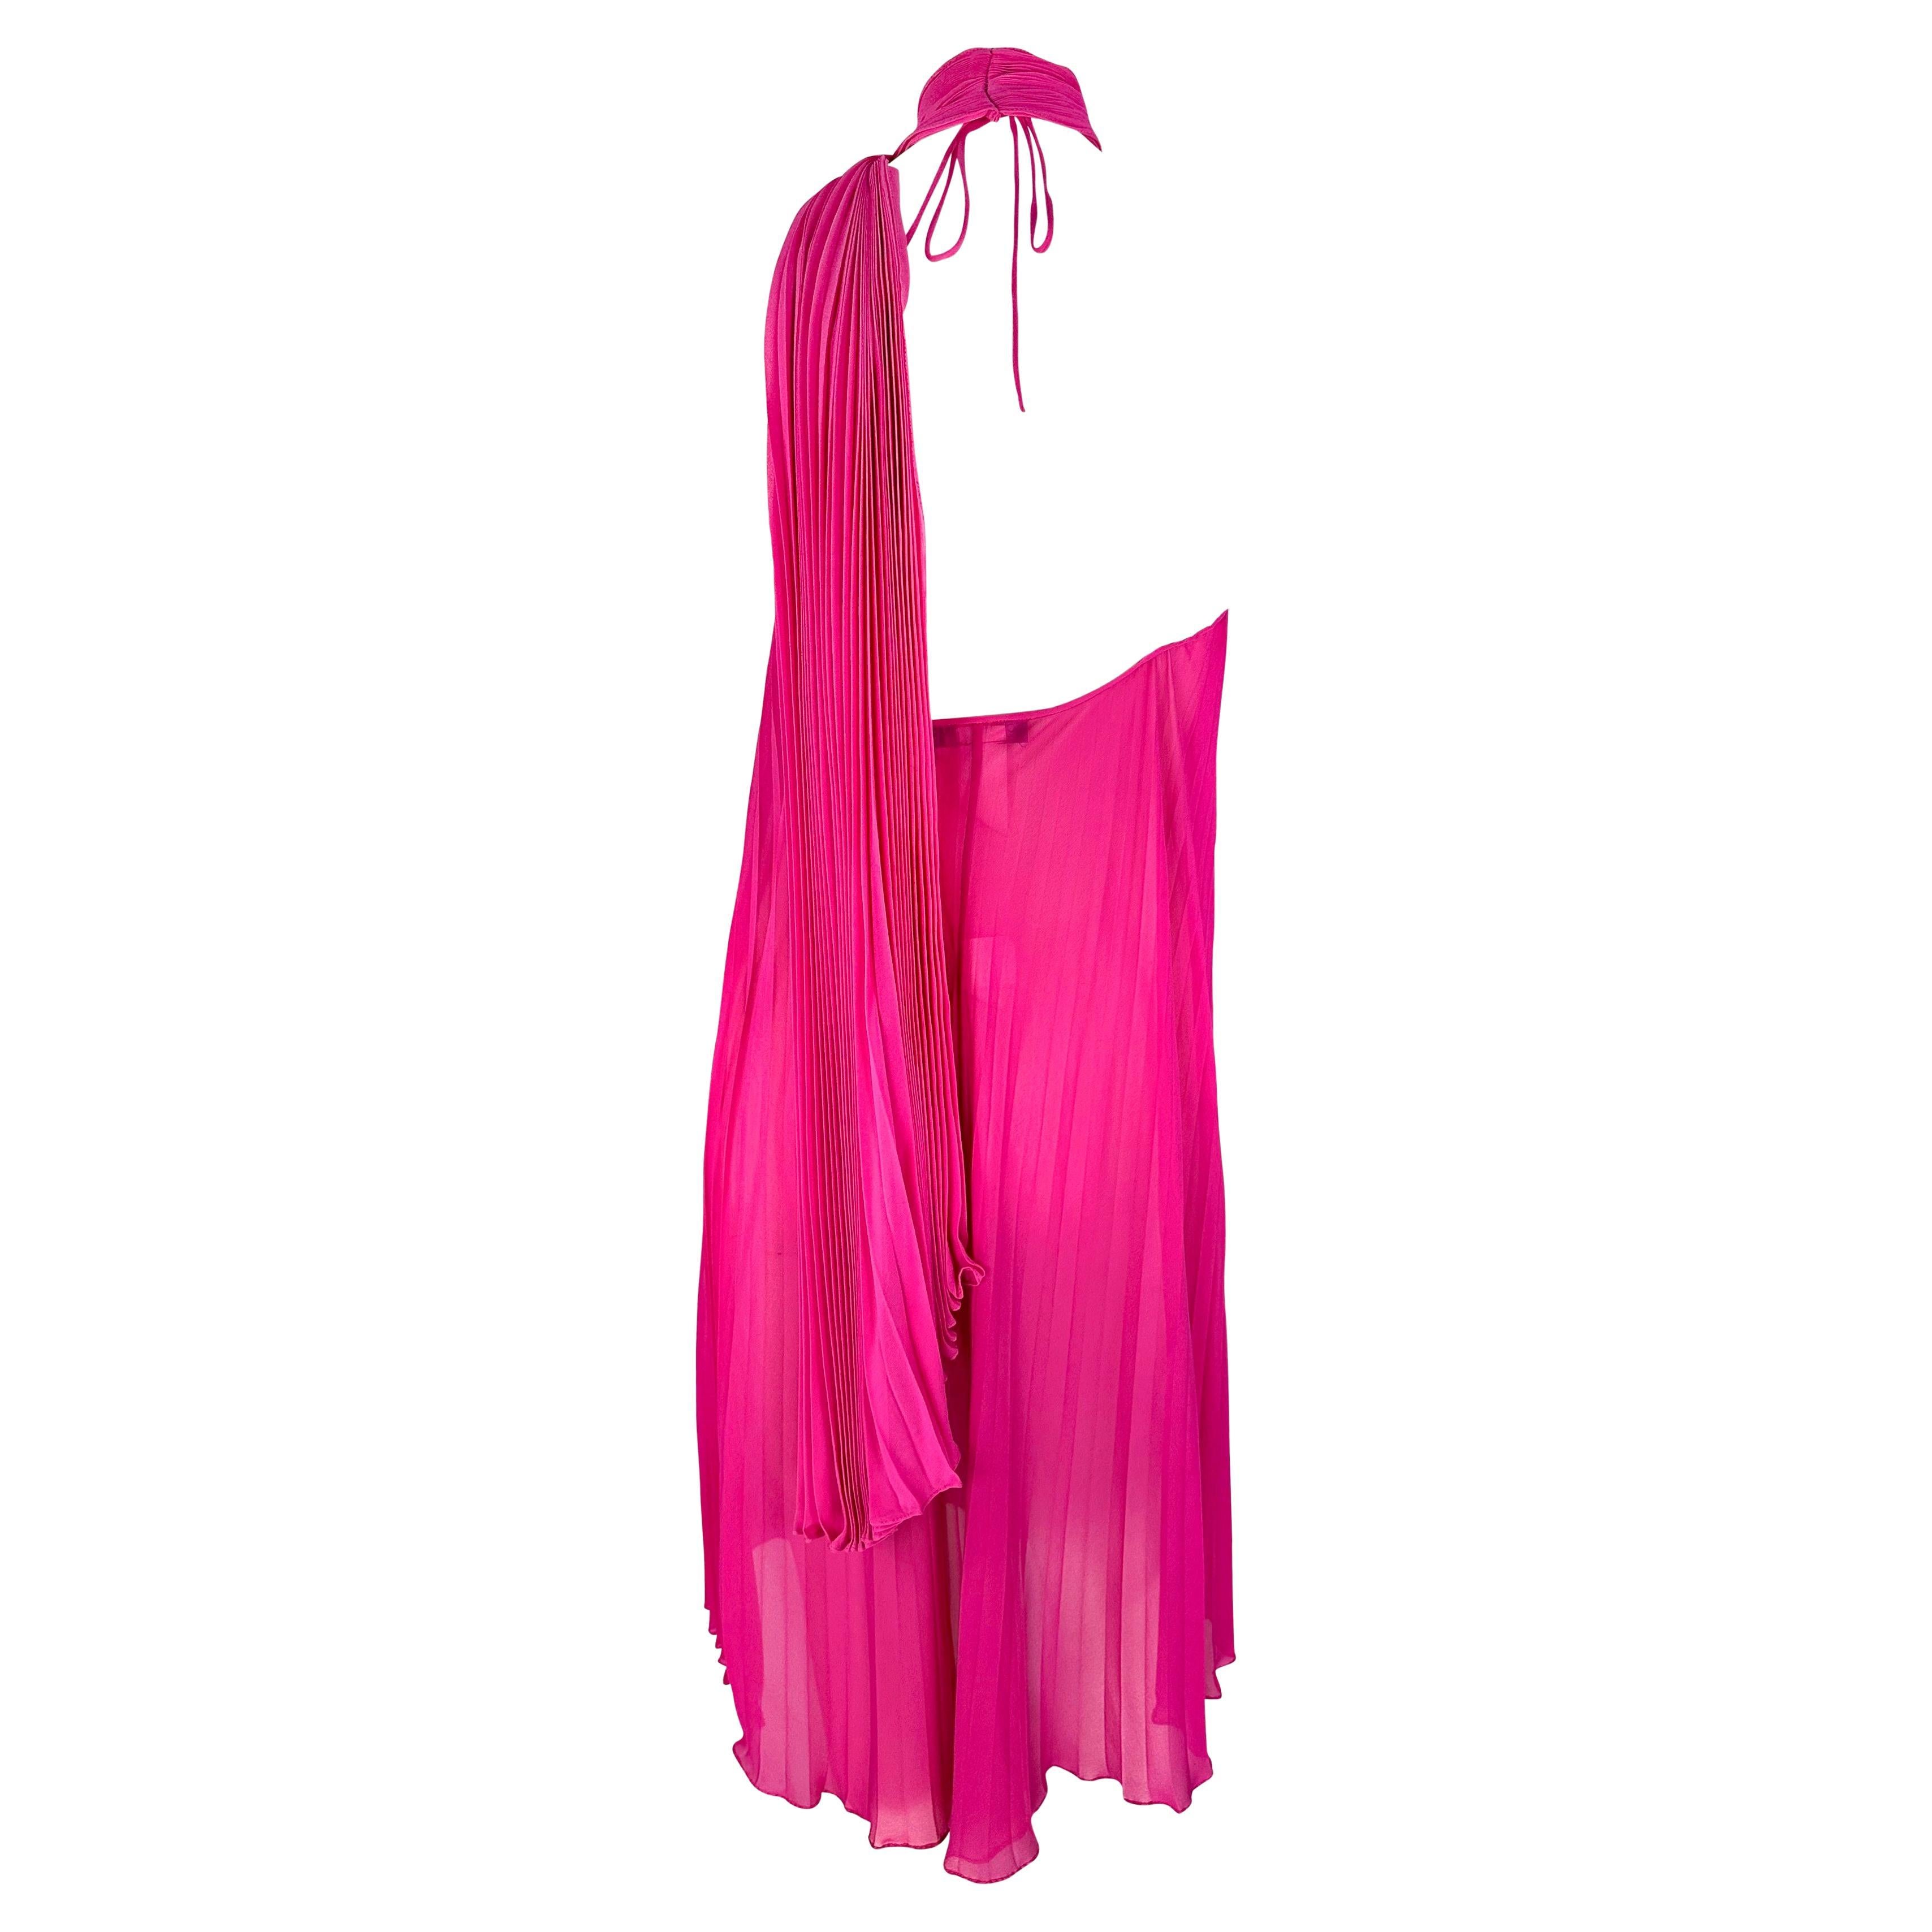 F/W 2000 Dolce & Gabbana Sheer Hot Pink Pleated Chiffon Floral Appliqué Dress For Sale 3